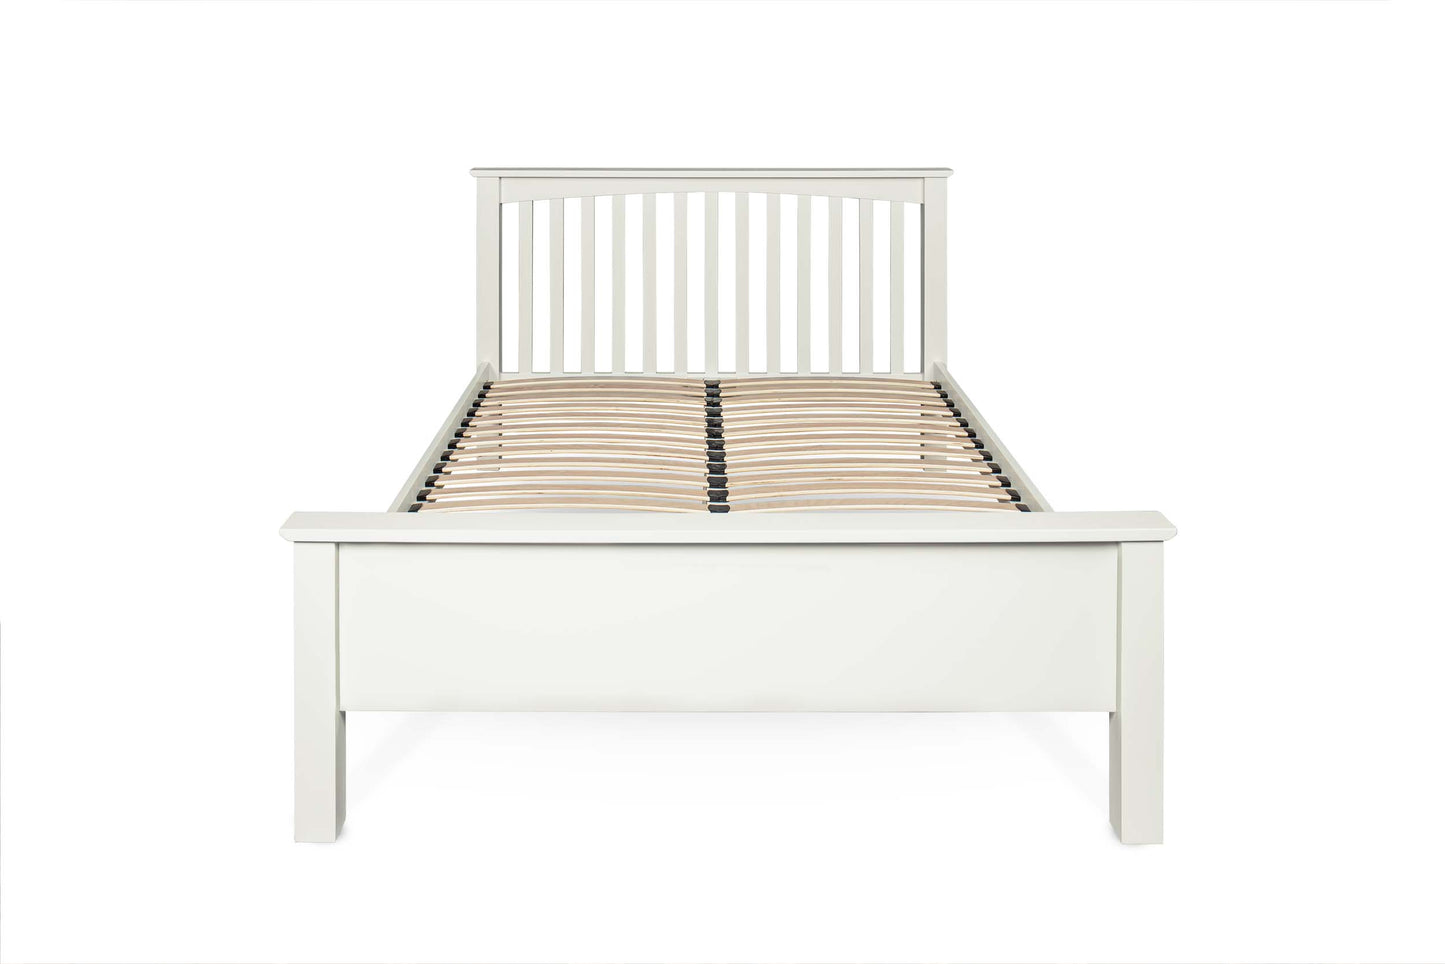 Brantham Bed Frame - Low Foot End - 5ft King Size - Soft White